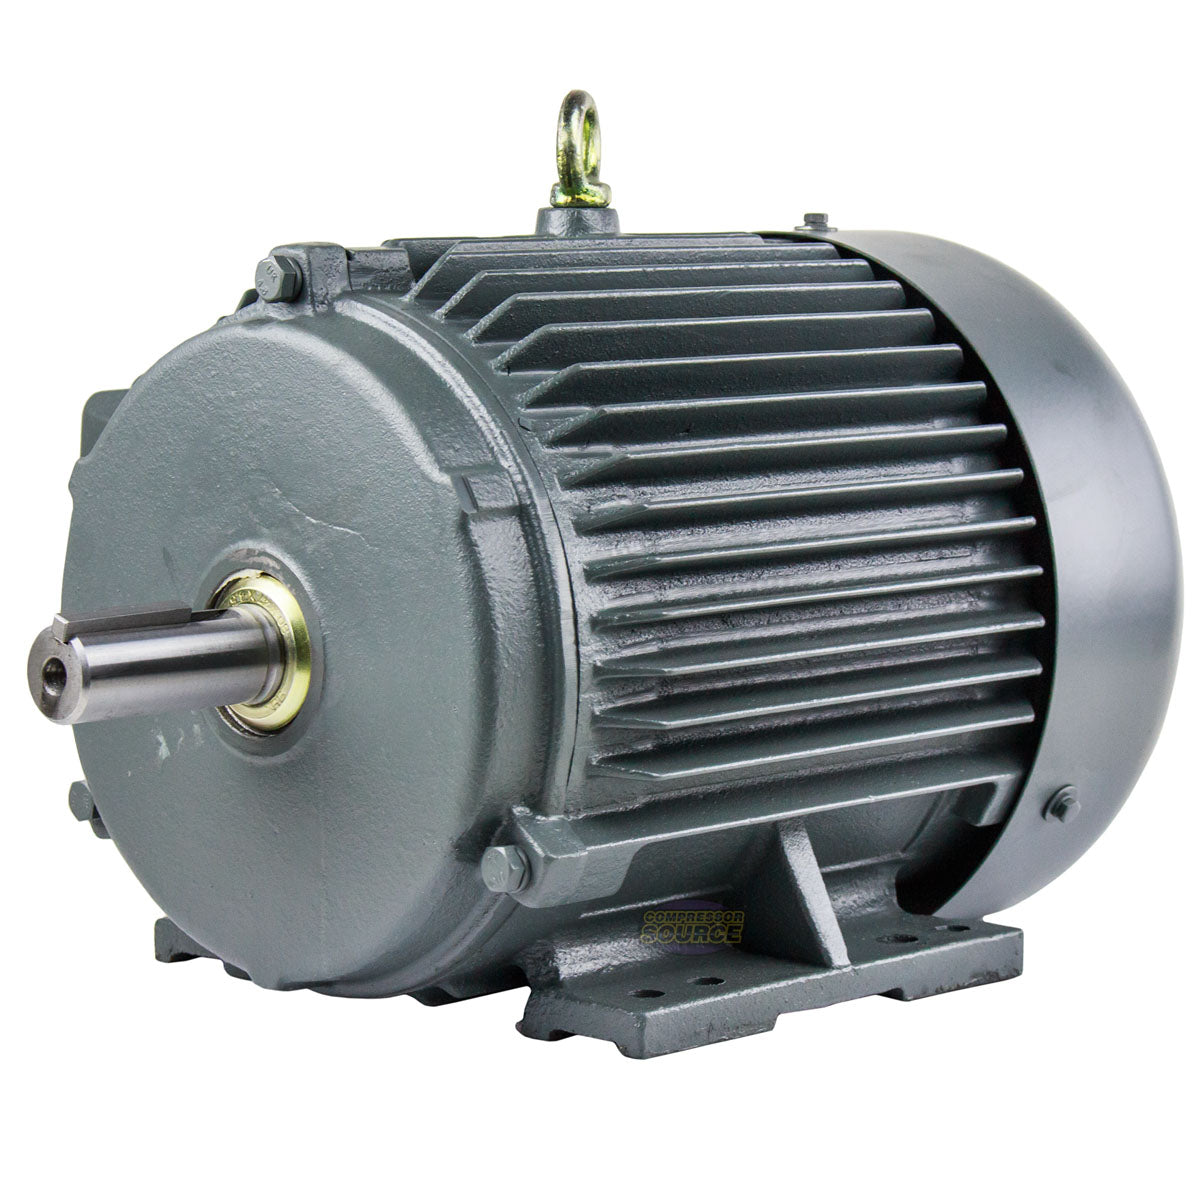 5 HP 3 Phase Electric Motor 3600  RPM 184T Frame TEFC 230/460 Volt Severe Duty